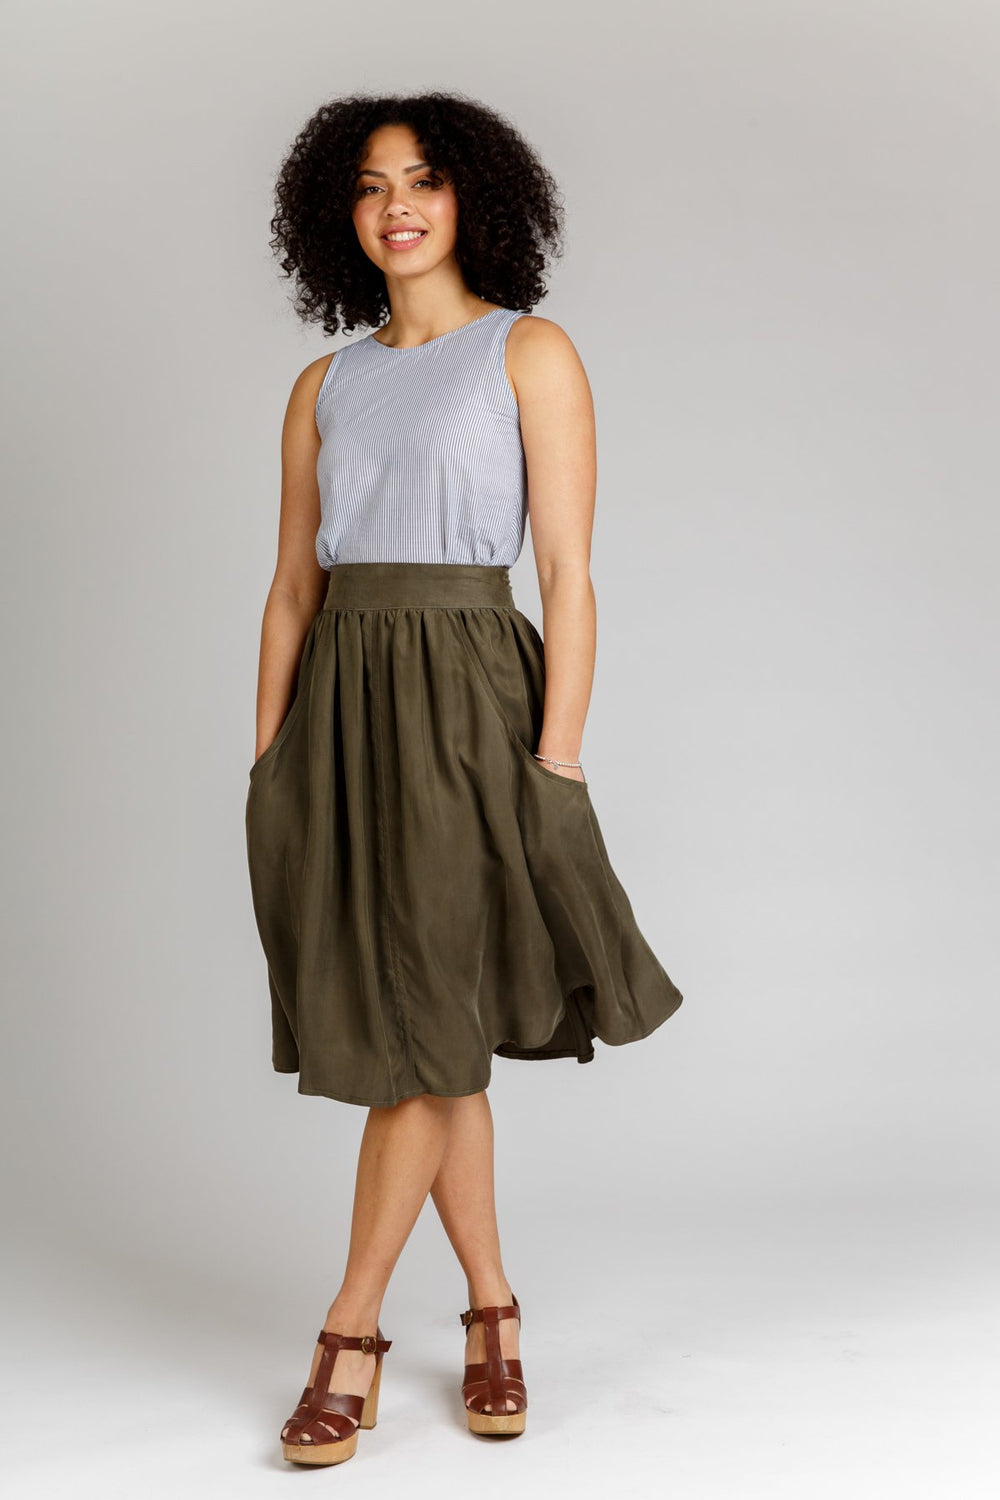 Woman wearing the Brumby Skirt sewing pattern from Megan Nielsen on The Fold Line. A skirt pattern made in denim, corduroy, linen, broadcloth, wool, cotton shirting, chambray, silk, rayon and crepe de chine fabrics, featuring deep scoop pockets, back expo